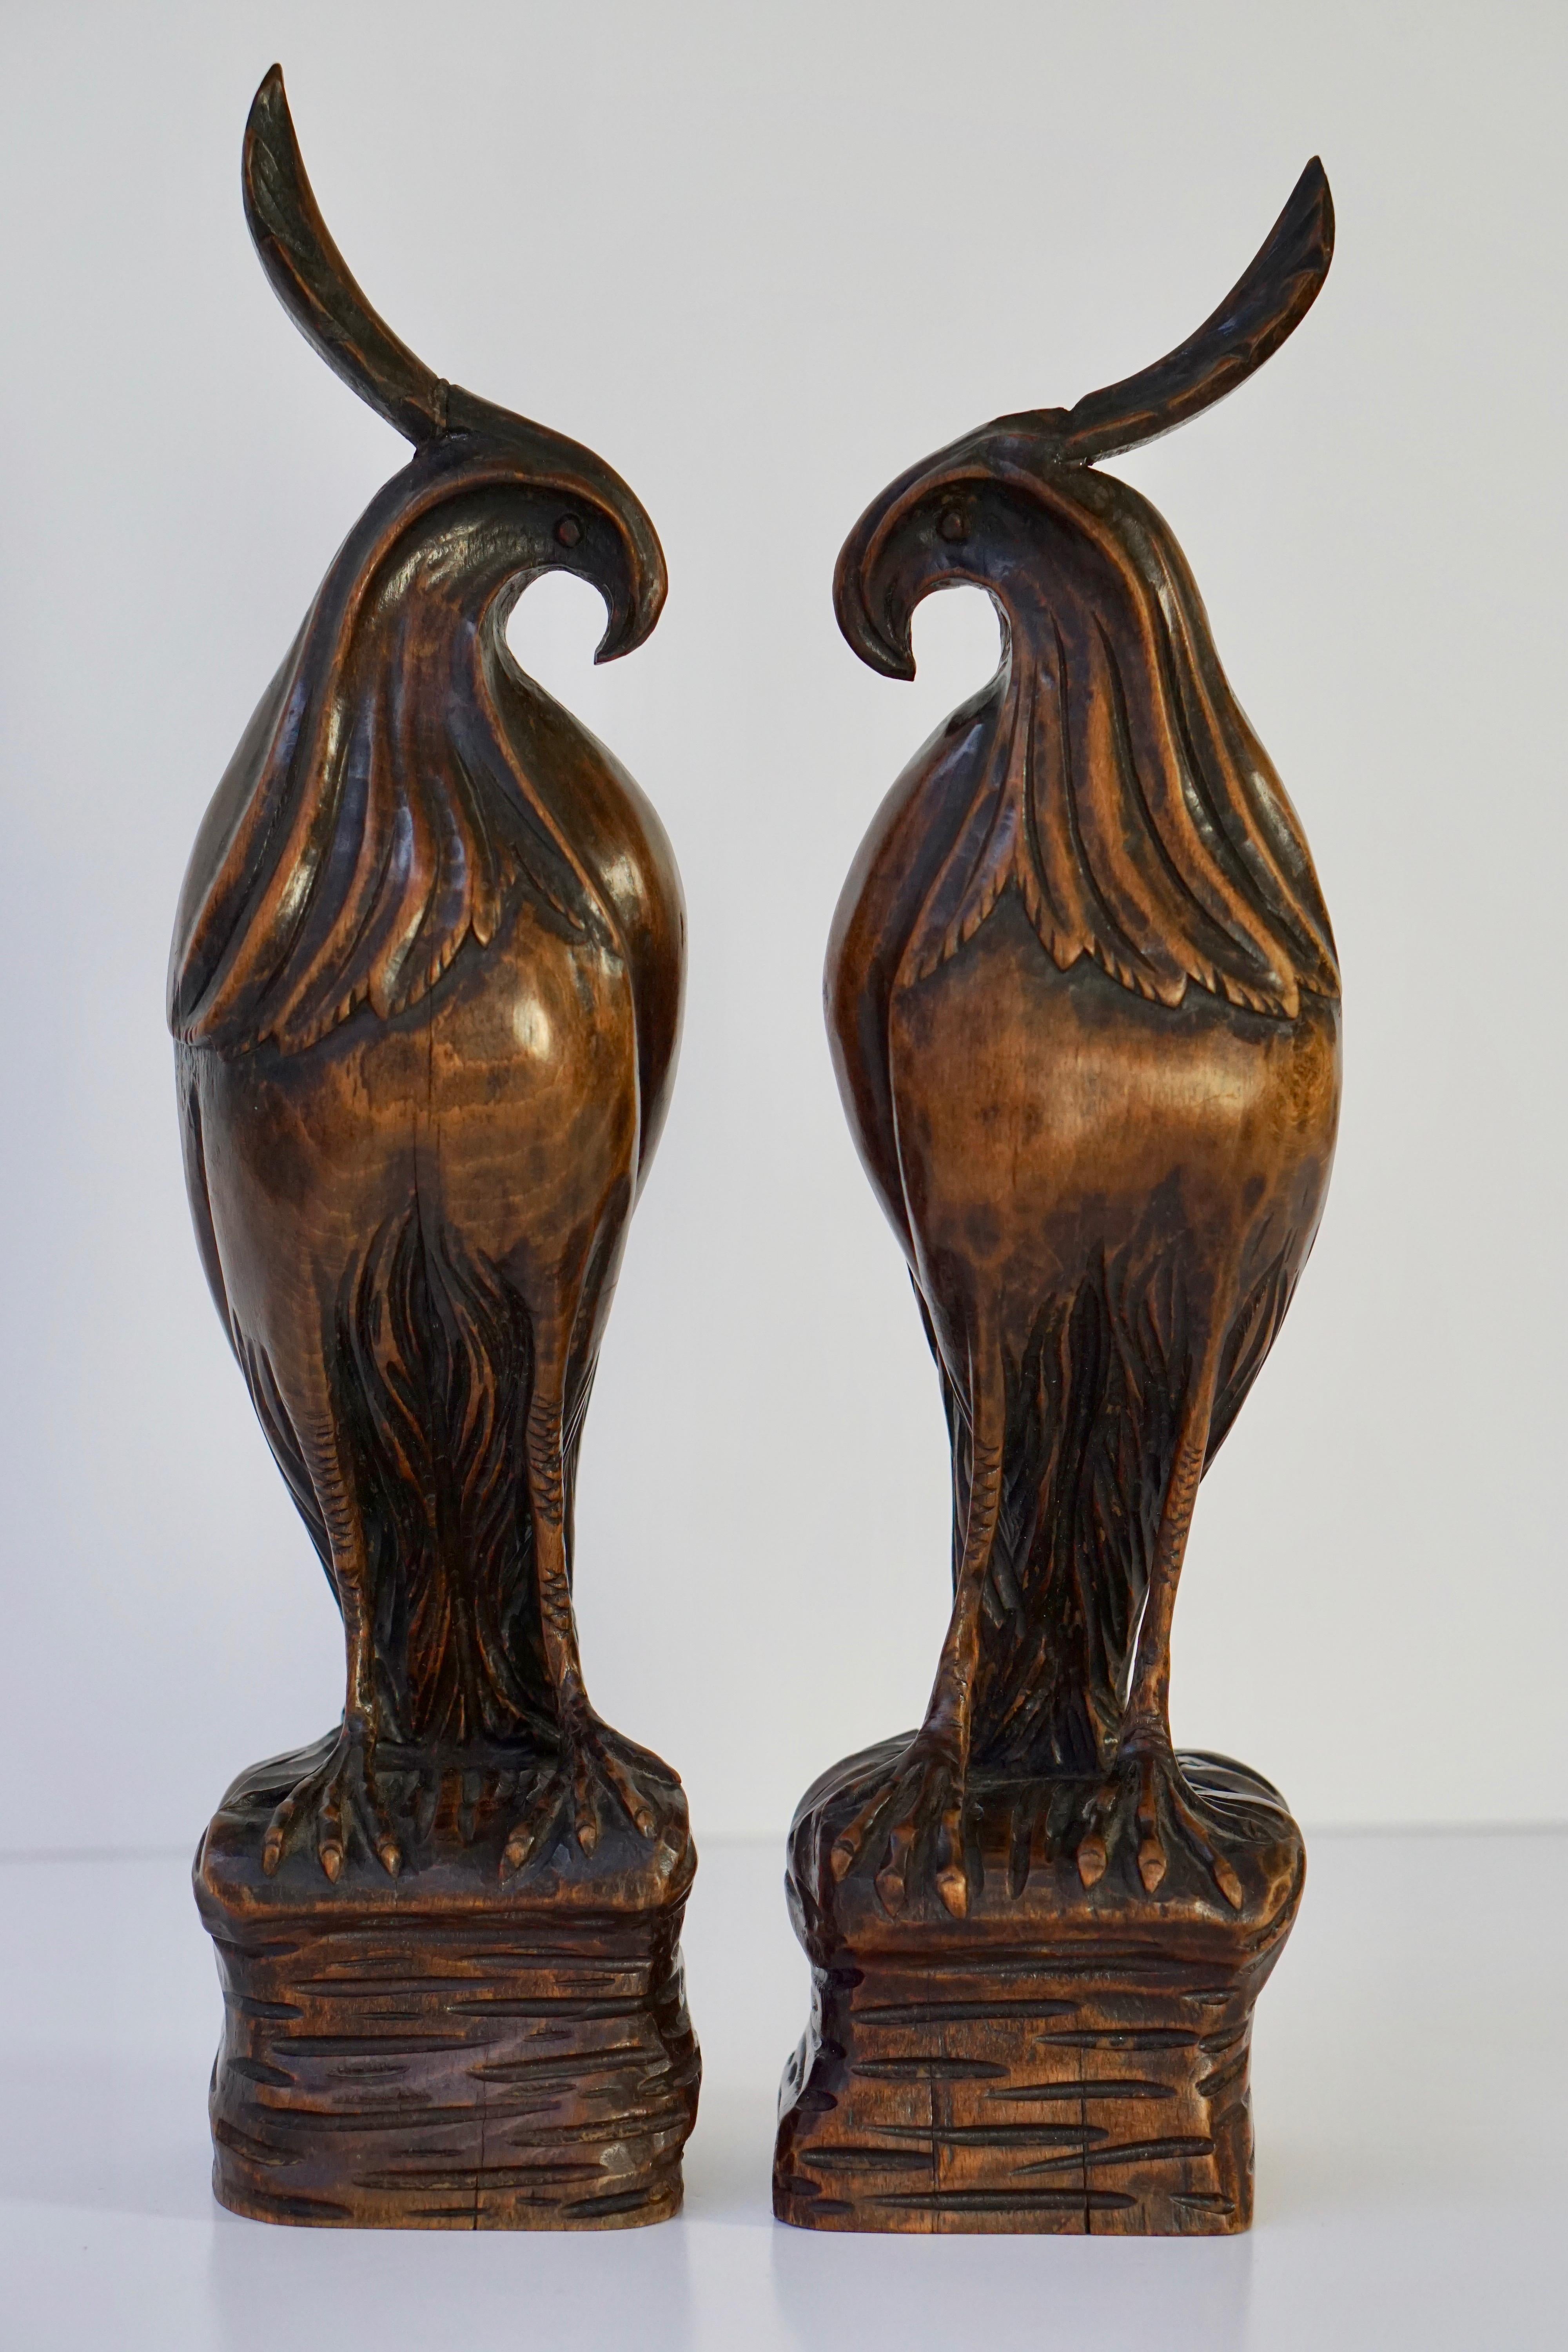 Two highly styled carved wooden birds.
Height 38 cm.